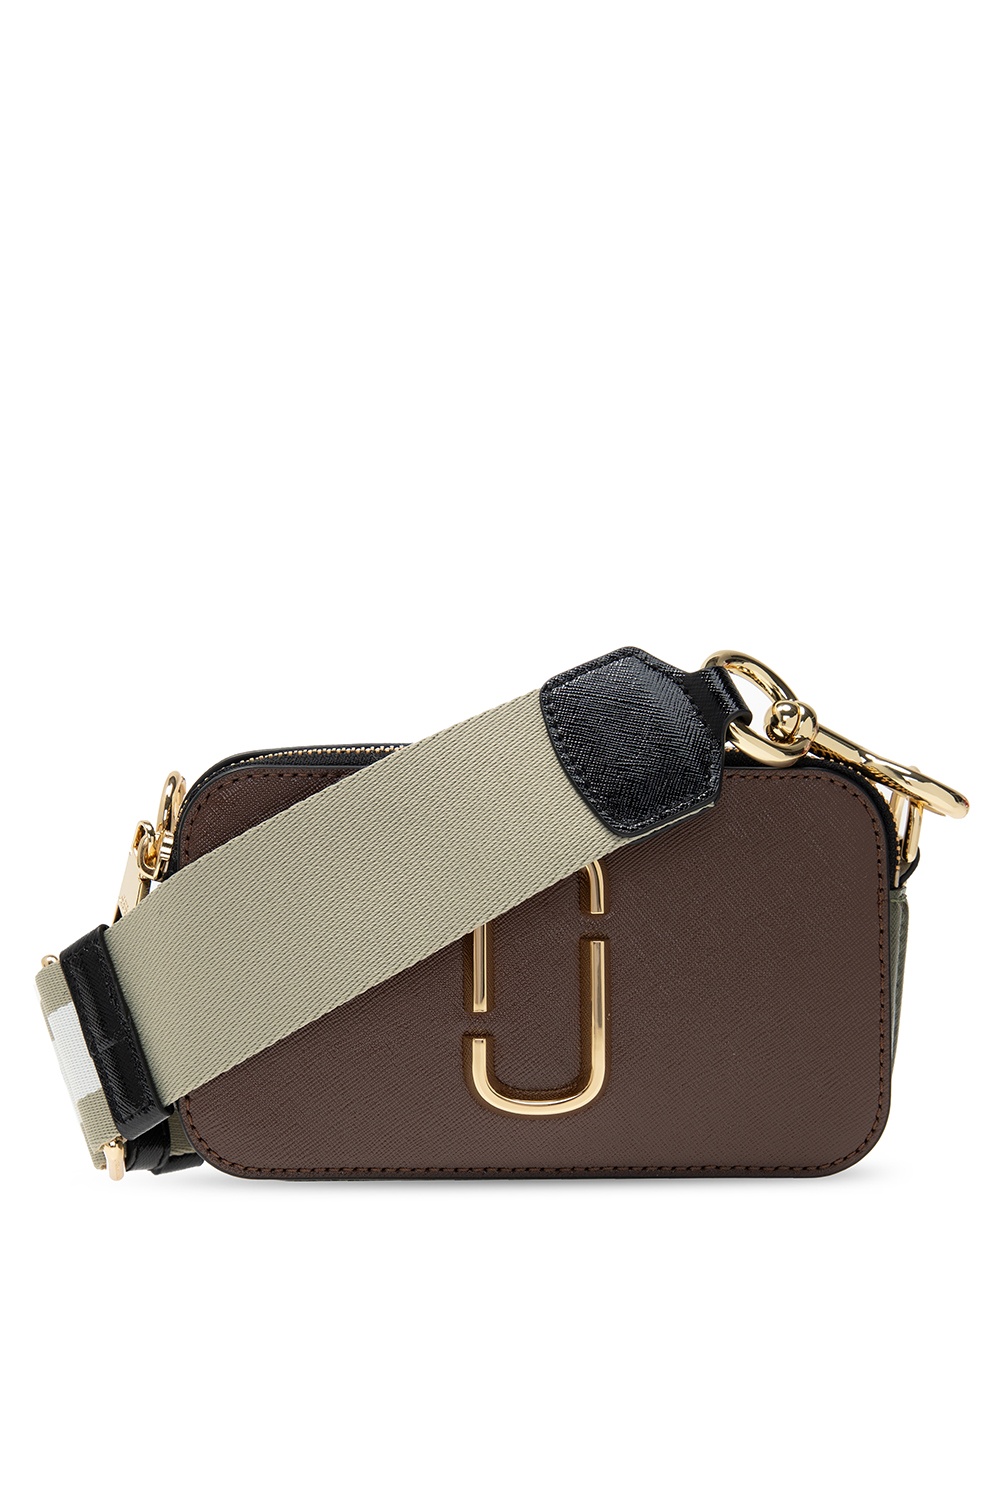 [Marc Jacobs] The snapshot camera cross bag M0012007 Free Gifts